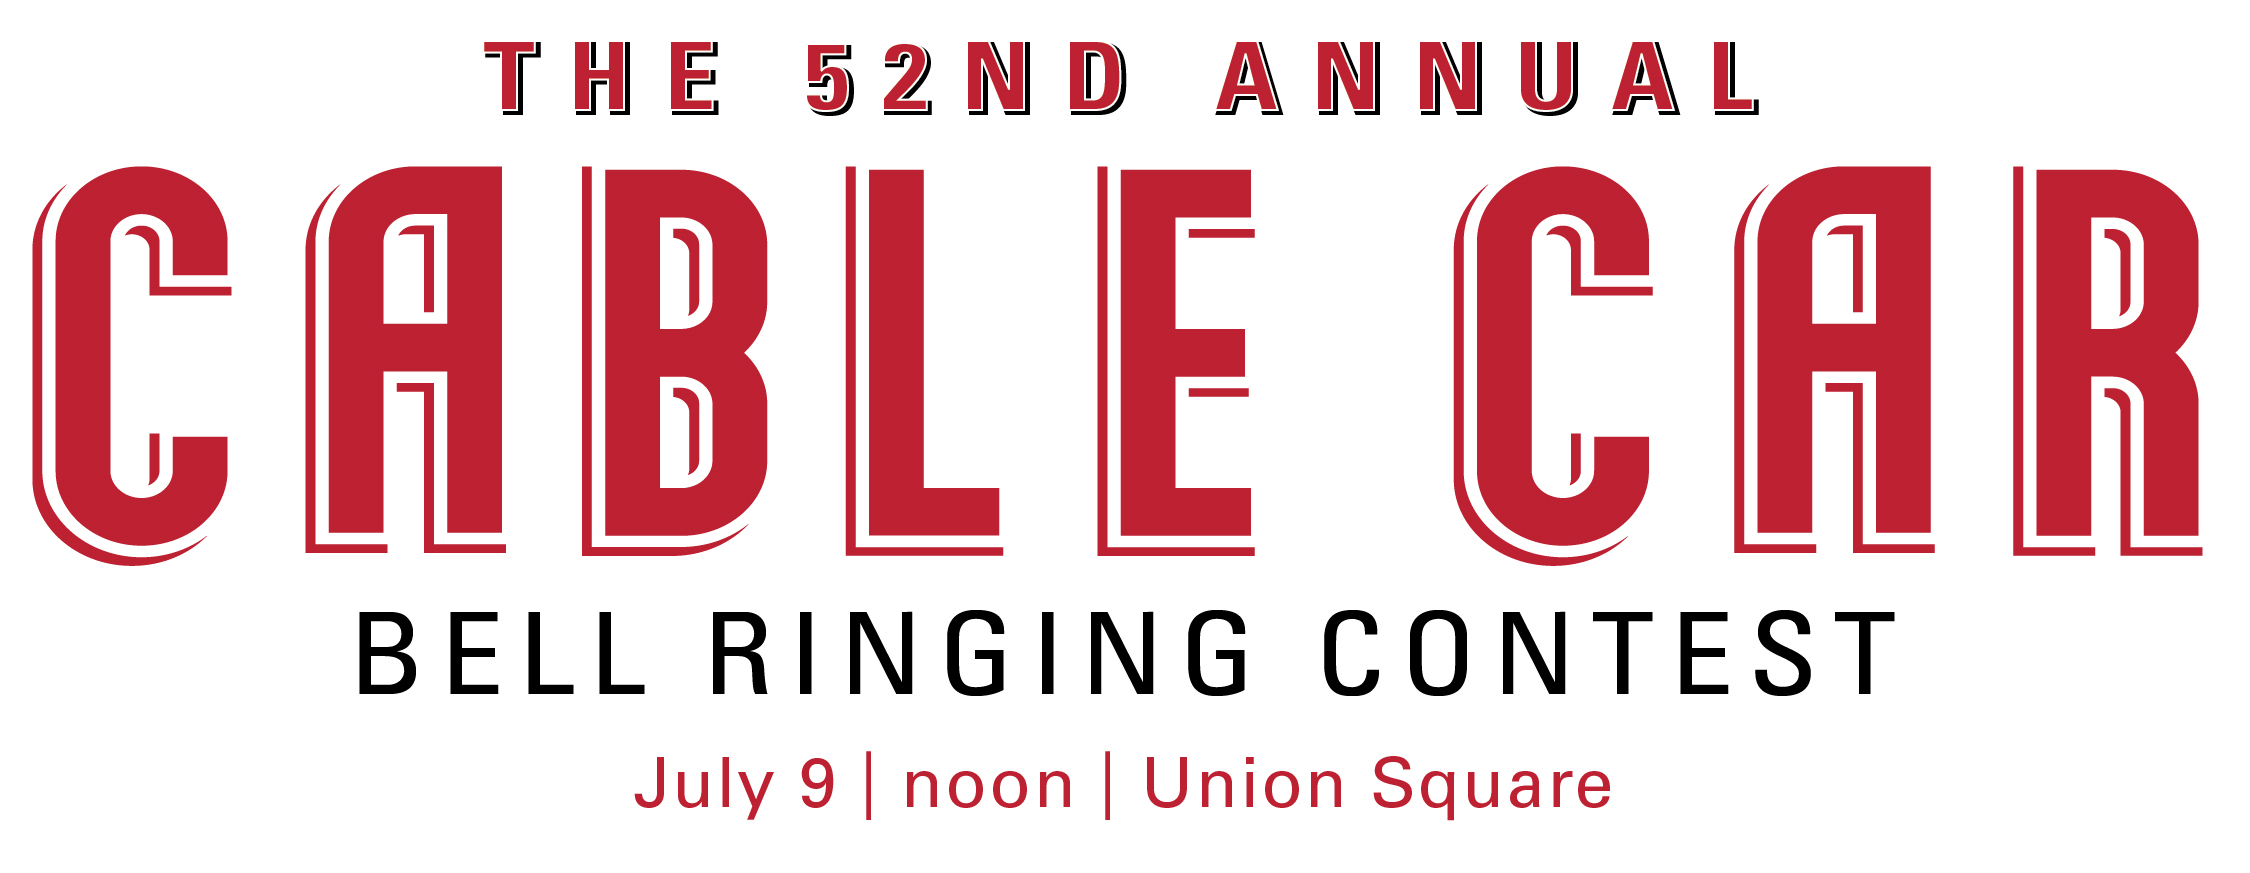 "The 52nd Annual, Cable Car Bell Ringing Contest, July 9, Noon, Union Square" in red and black font on a white background